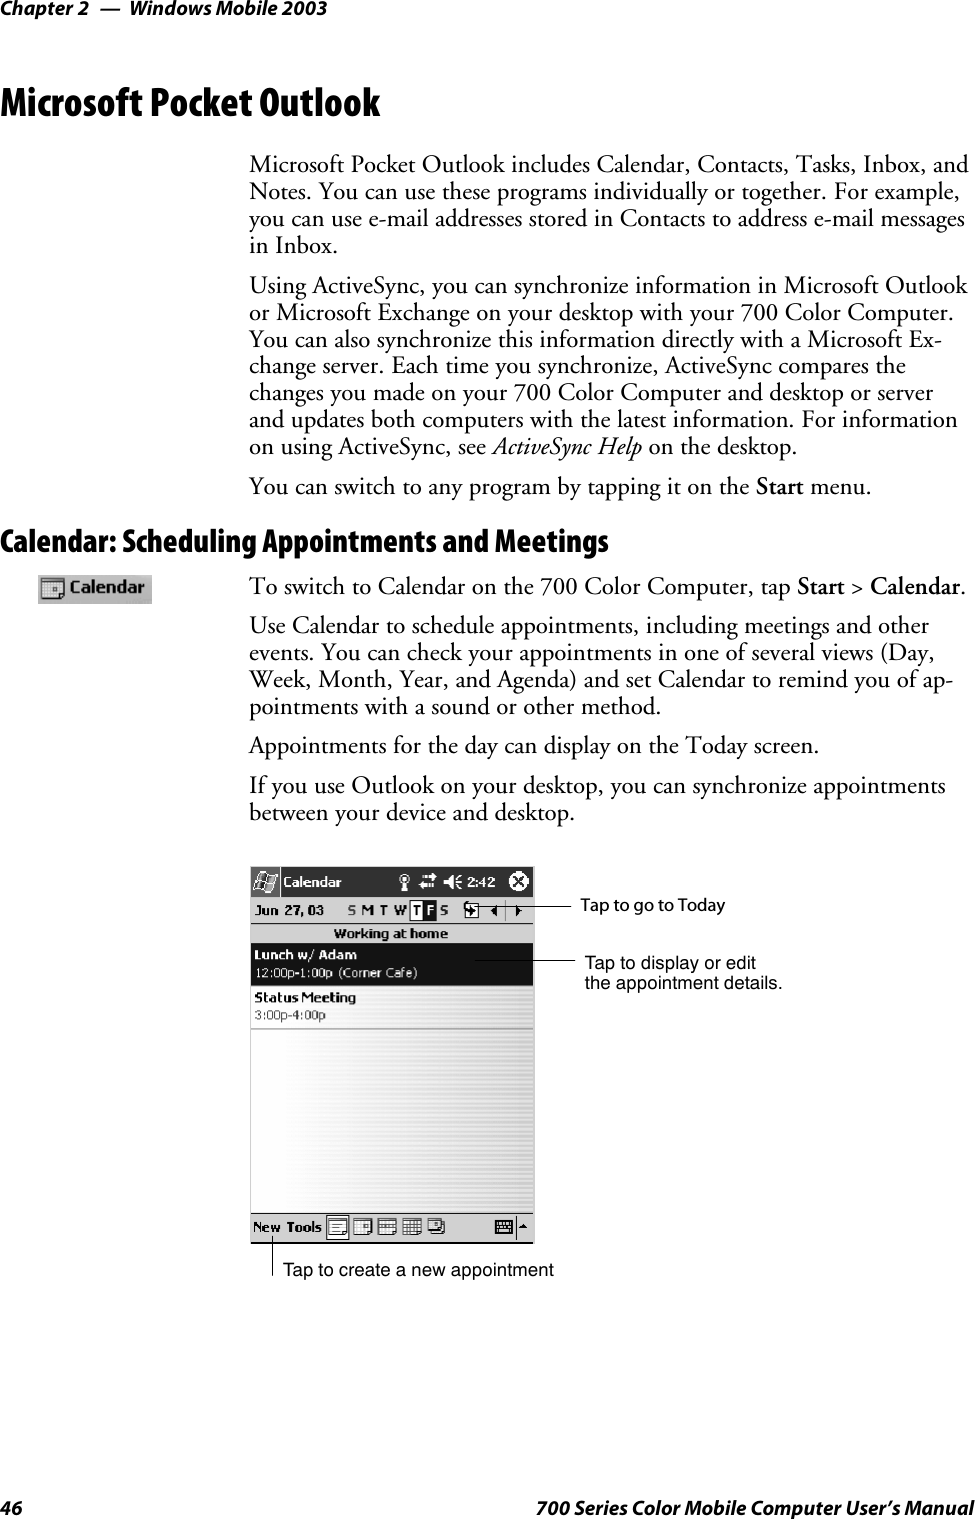 Windows Mobile 2003Chapter —246 700 Series Color Mobile Computer User’s ManualMicrosoft Pocket OutlookMicrosoft Pocket Outlook includes Calendar, Contacts, Tasks, Inbox, andNotes. You can use these programs individually or together. For example,you can use e-mail addresses stored in Contacts to address e-mail messagesin Inbox.Using ActiveSync, you can synchronize information in Microsoft Outlookor Microsoft Exchange on your desktop with your 700 Color Computer.You can also synchronize this information directly with a Microsoft Ex-change server. Each time you synchronize, ActiveSync compares thechanges you made on your 700 Color Computer and desktop or serverand updates both computers with the latest information. For informationon using ActiveSync, see ActiveSync Help on the desktop.You can switch to any program by tapping it on the Start menu.Calendar: Scheduling Appointments and MeetingsTo switch to Calendar on the 700 Color Computer, tap Start &gt;Calendar.Use Calendar to schedule appointments, including meetings and otherevents. You can check your appointments in one of several views (Day,Week, Month, Year, and Agenda) and set Calendar to remind you of ap-pointments with a sound or other method.Appointments for the day can display on the Today screen.If you use Outlook on your desktop, you can synchronize appointmentsbetween your device and desktop.Tap to create a new appointmentTaptogotoTodayTap to display or editthe appointment details.